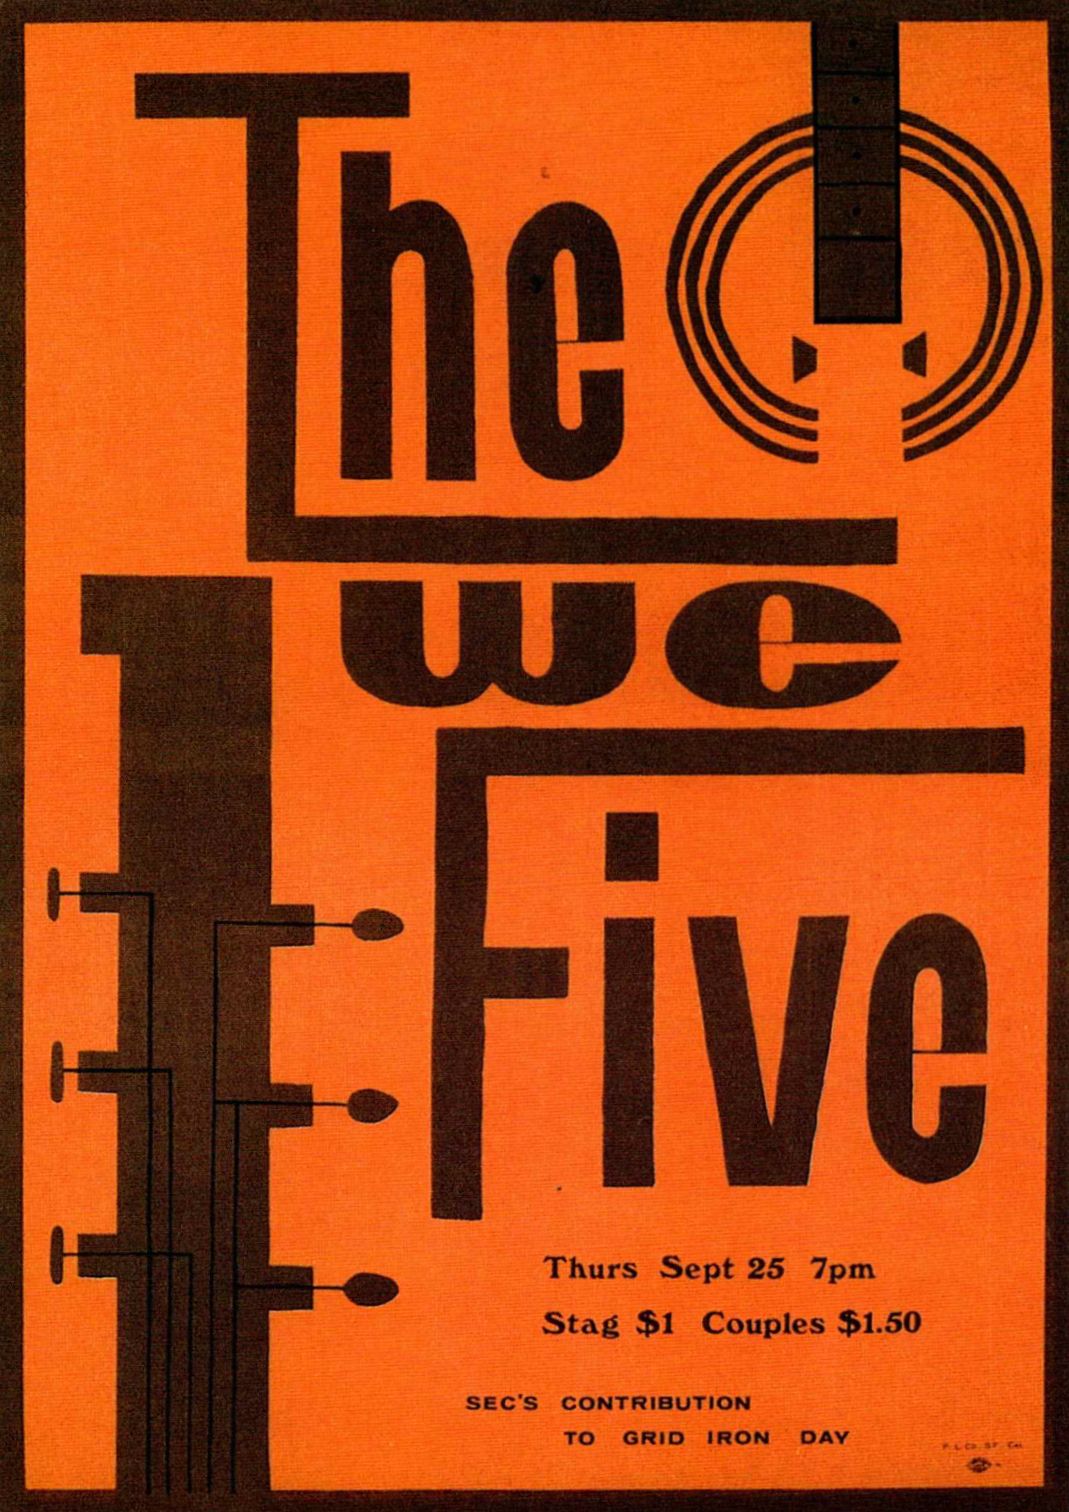 AOR-1.106 The We Five (Gridiron Day) 1965 Concert Poster